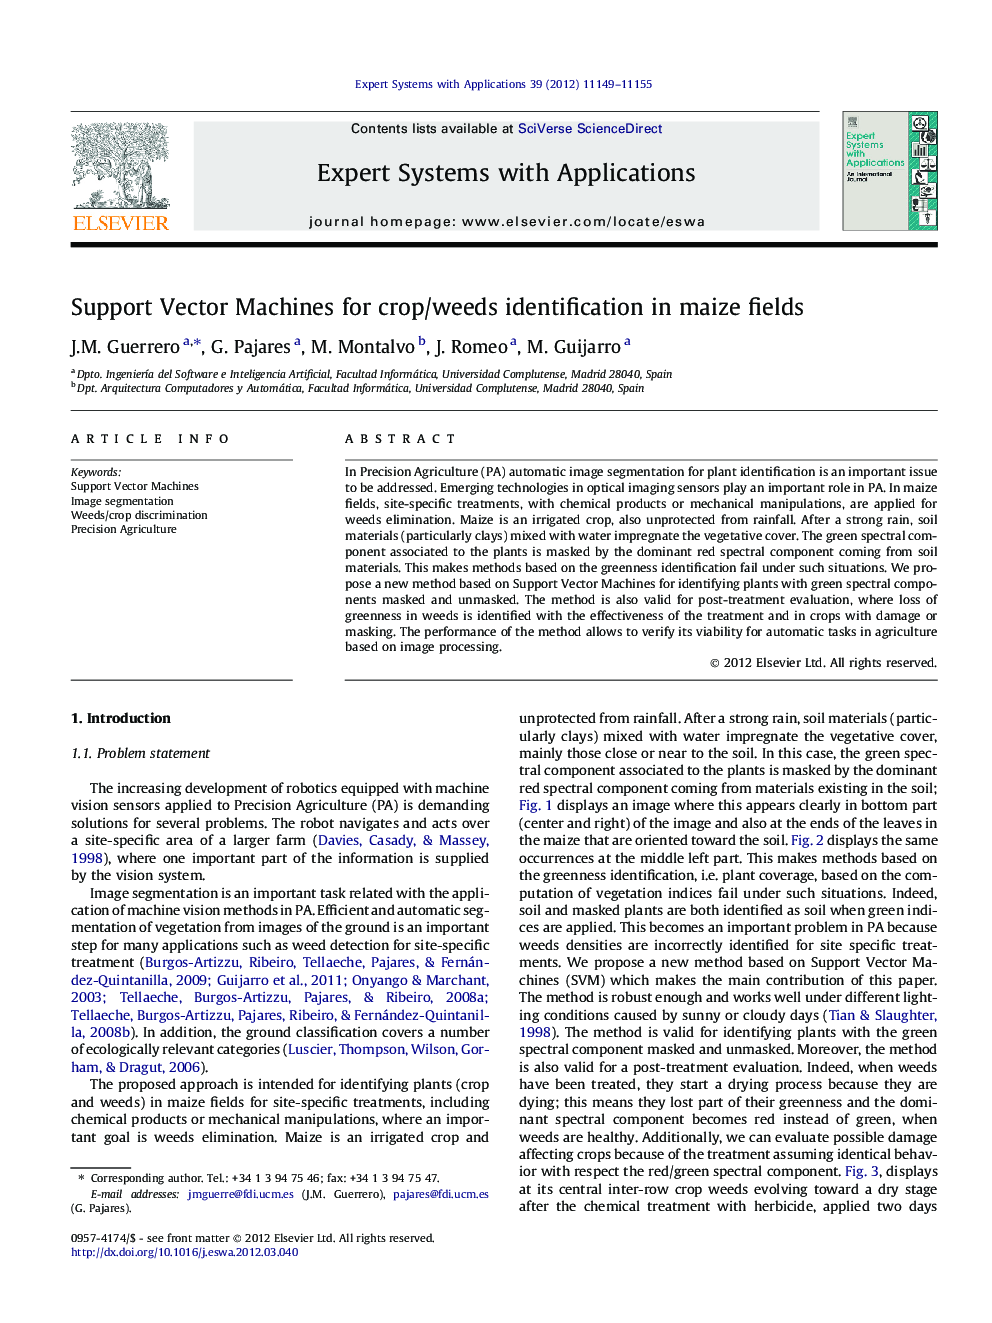 Support Vector Machines for crop/weeds identification in maize fields